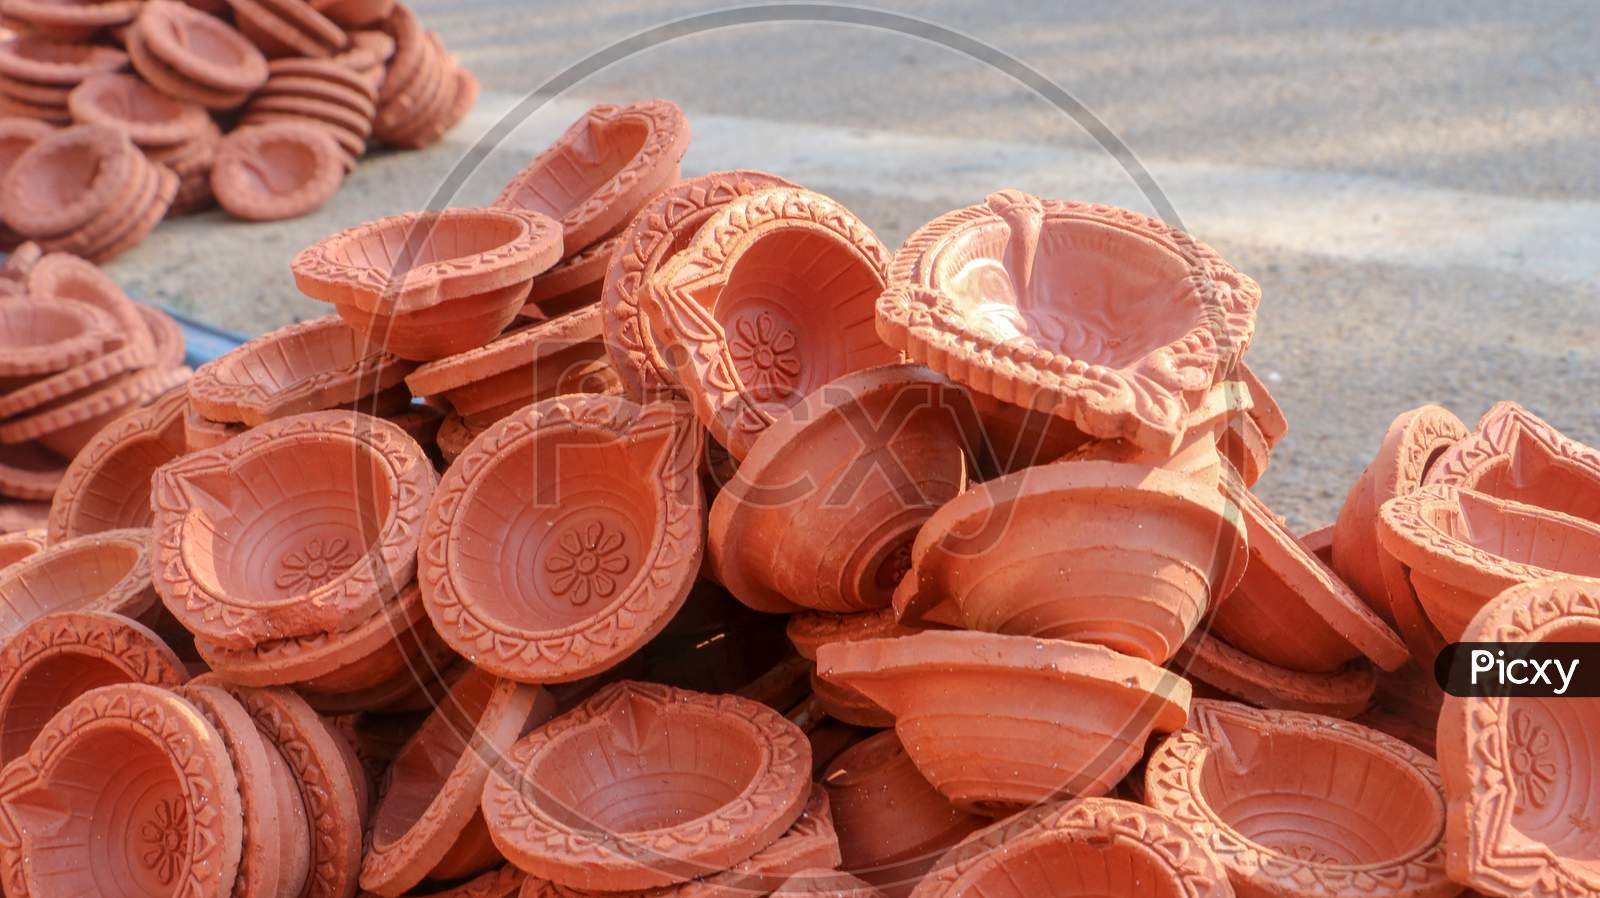 Clay diyas or oil lamps for Diwali for sale at a market in India